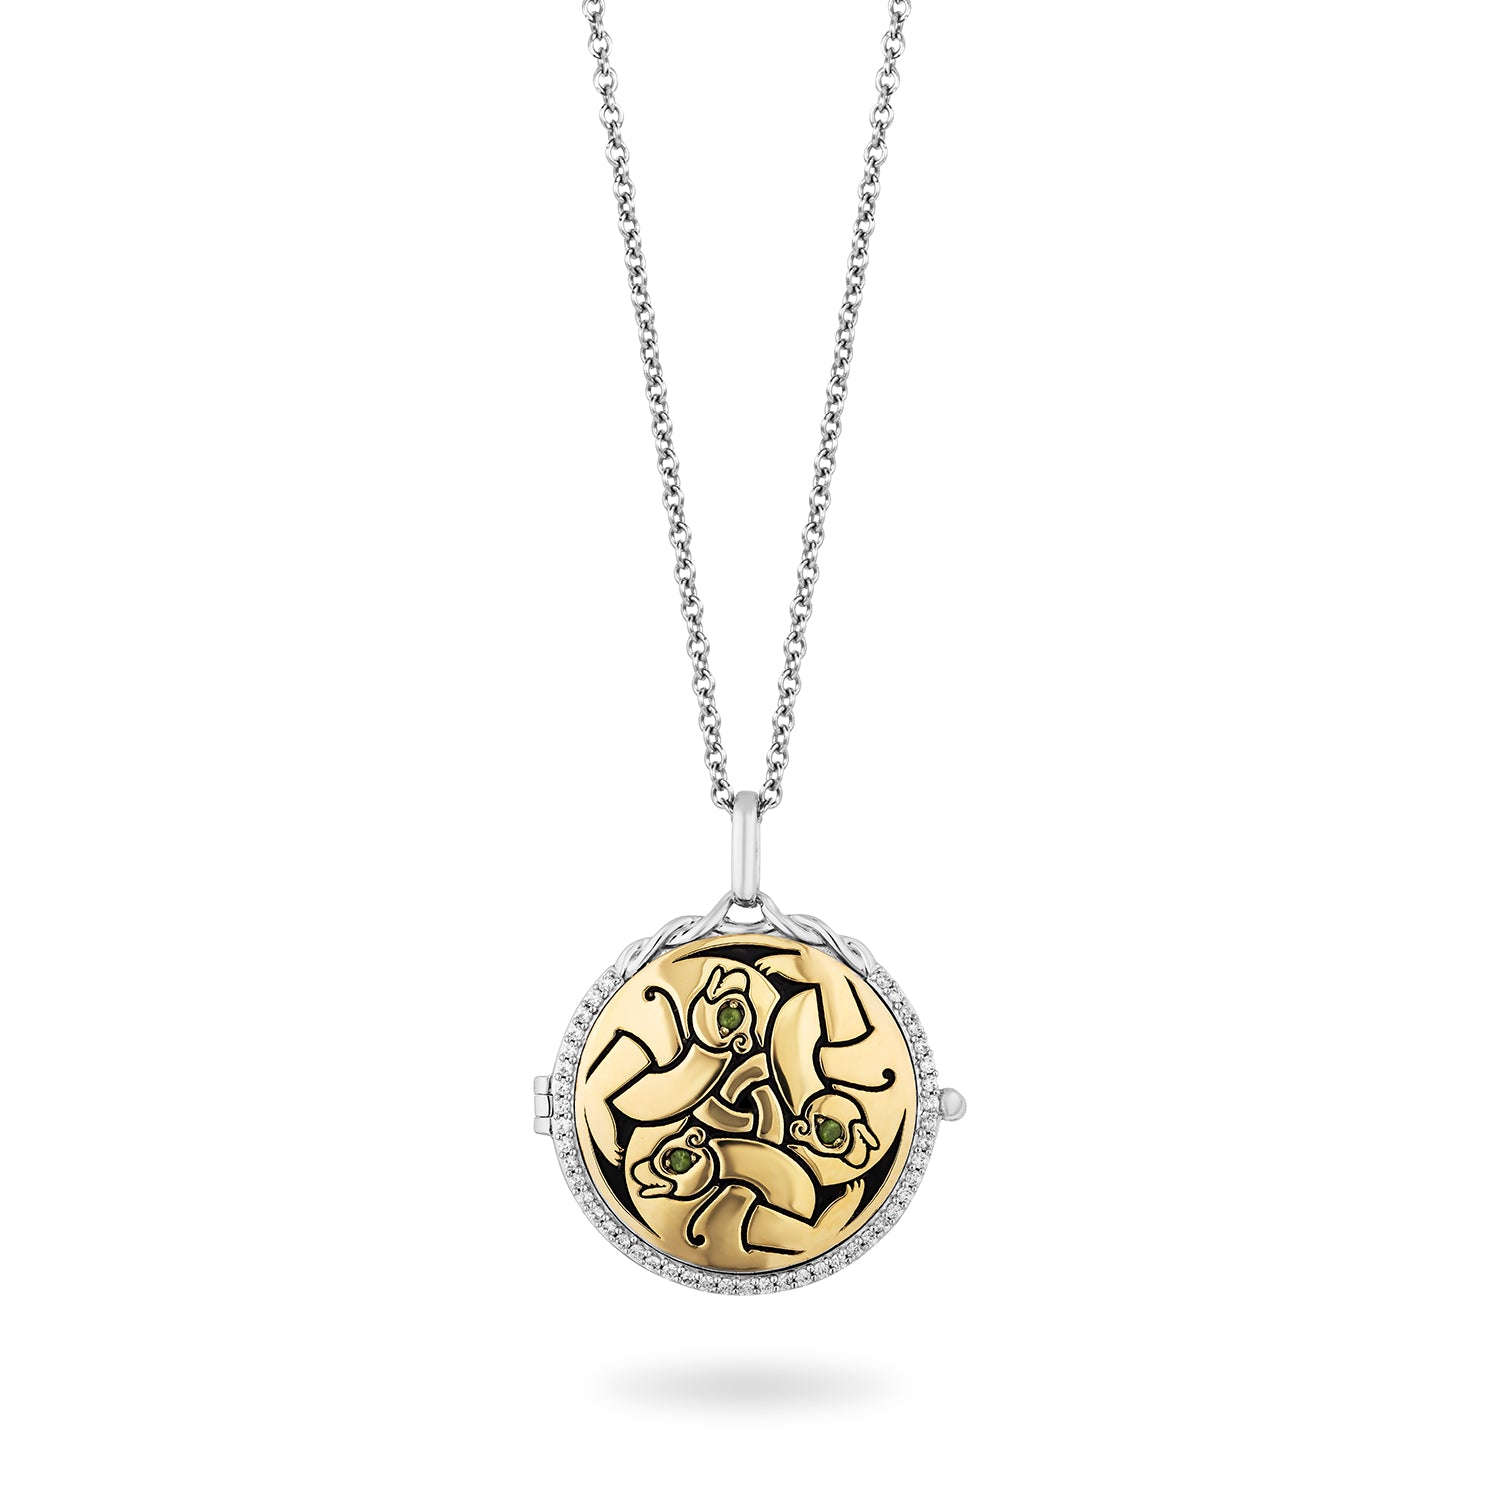 Buy Heart Necklace, Mother & Child Two Tone Gold and Silver Style Necklace, Sterling  Silver 925 Chain, Heart Chain, for Wife, for Mum, for Her Online in India -  Etsy